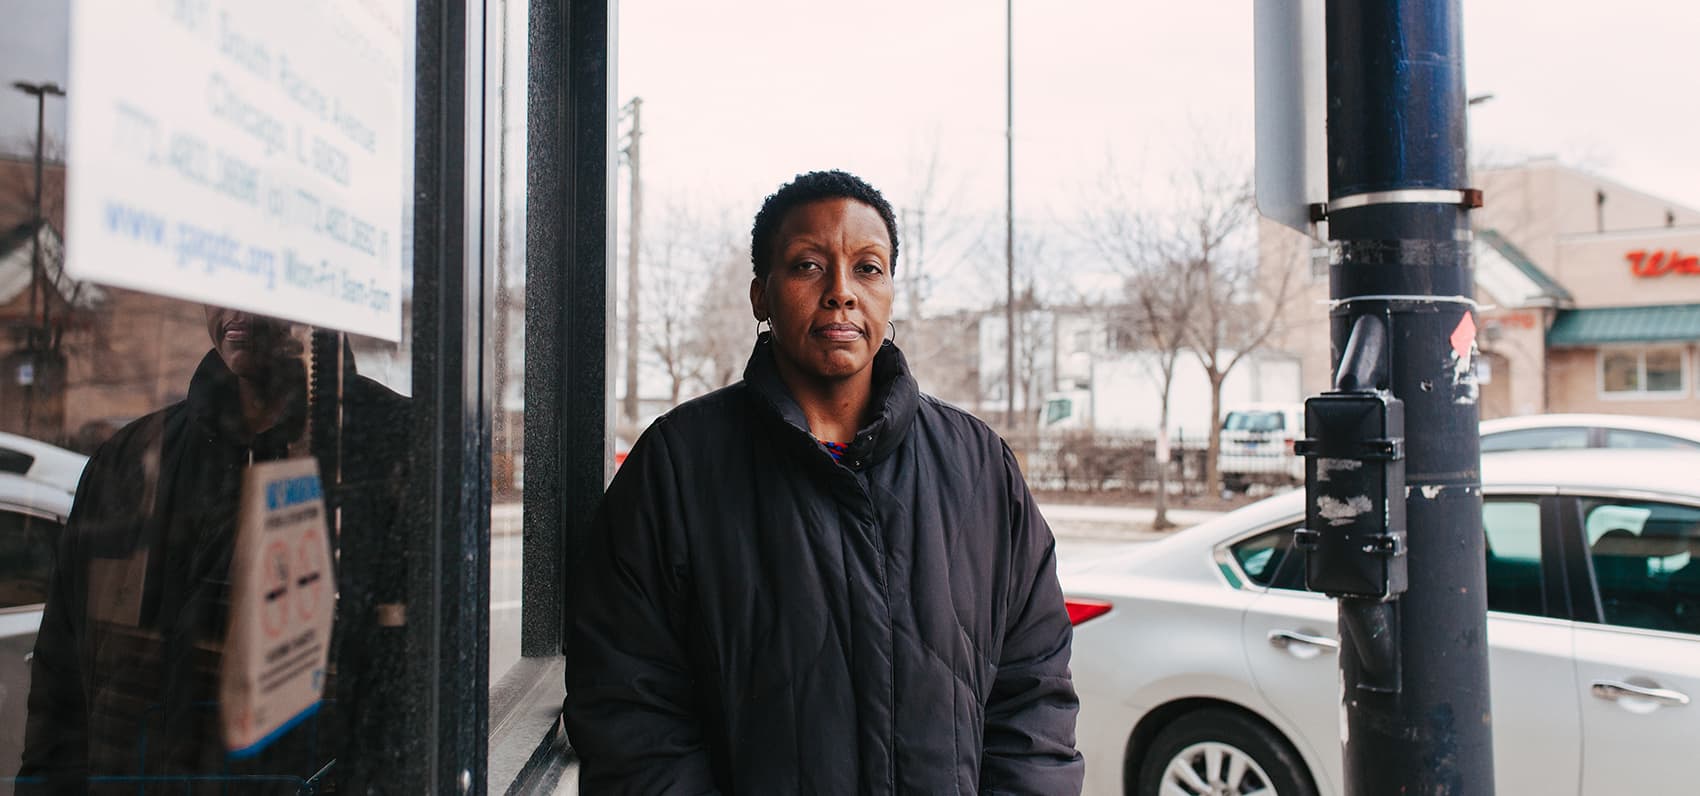 Kathryn Welch, who works at the Greater Auburn-Gresham Development Corporation in Chicago, stands at the same spot where she witnessed gunfire in the lot across the street. "It was a summer day and I was walking to Walgreens and I heard these pops," she says. Welch has moved from the city to South Holland, Ill., a Chicago suburb. (Danielle Scruggs for Here & Now)